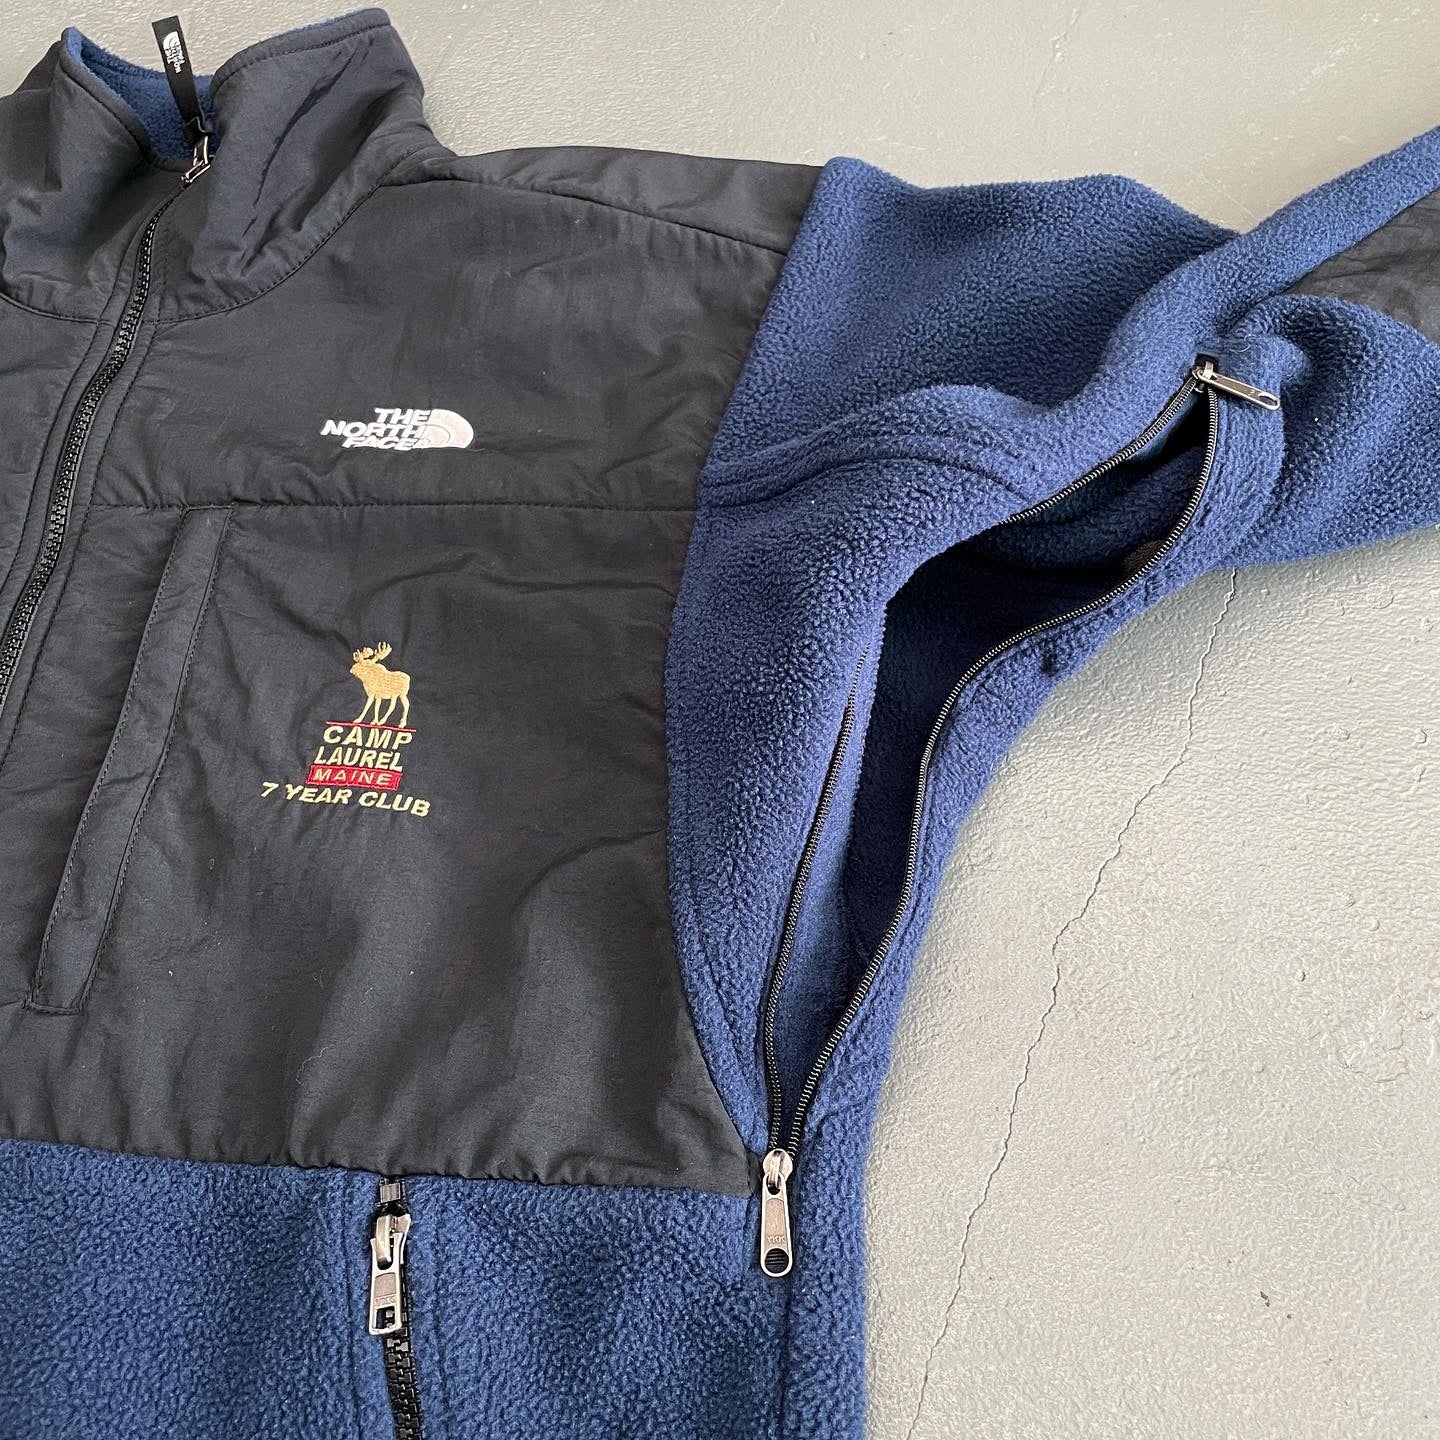 The North Face DENALI Jacket by CAMP LAUREL Maine 7 Year Club